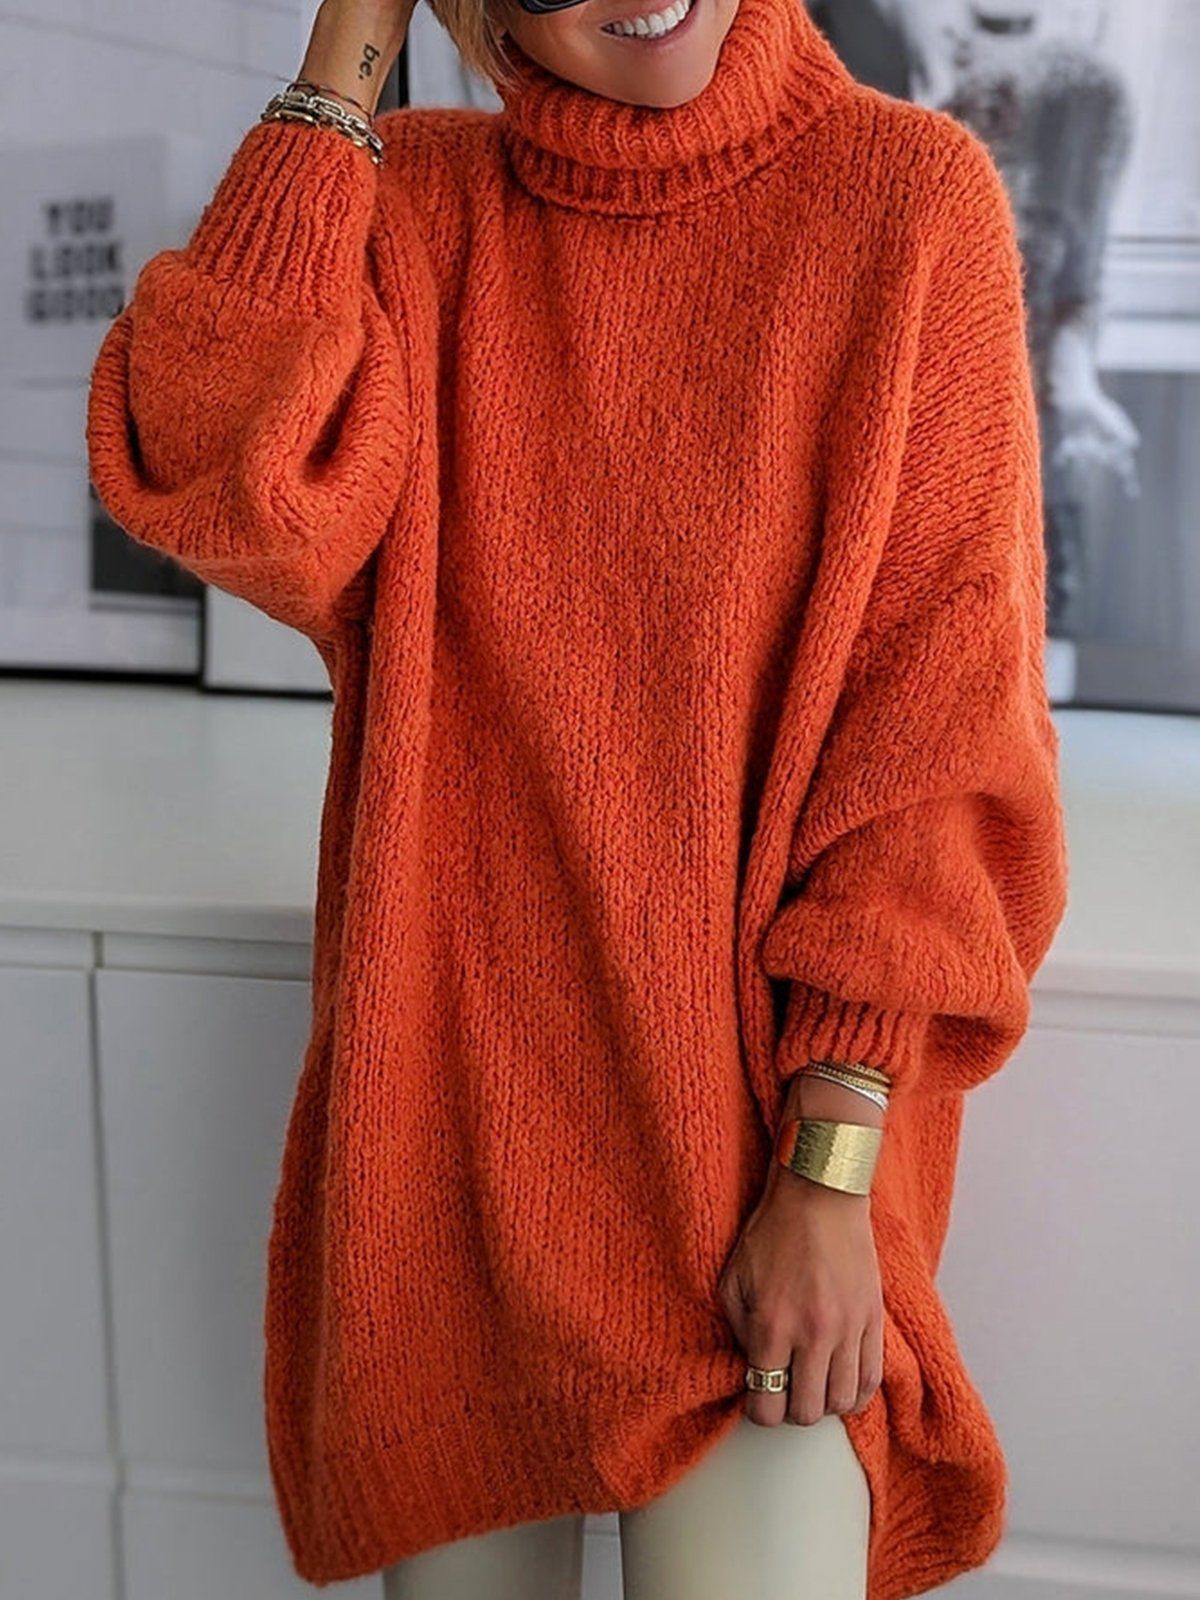 Cozy Comfort: Stay Warm in Tunic Sweaters